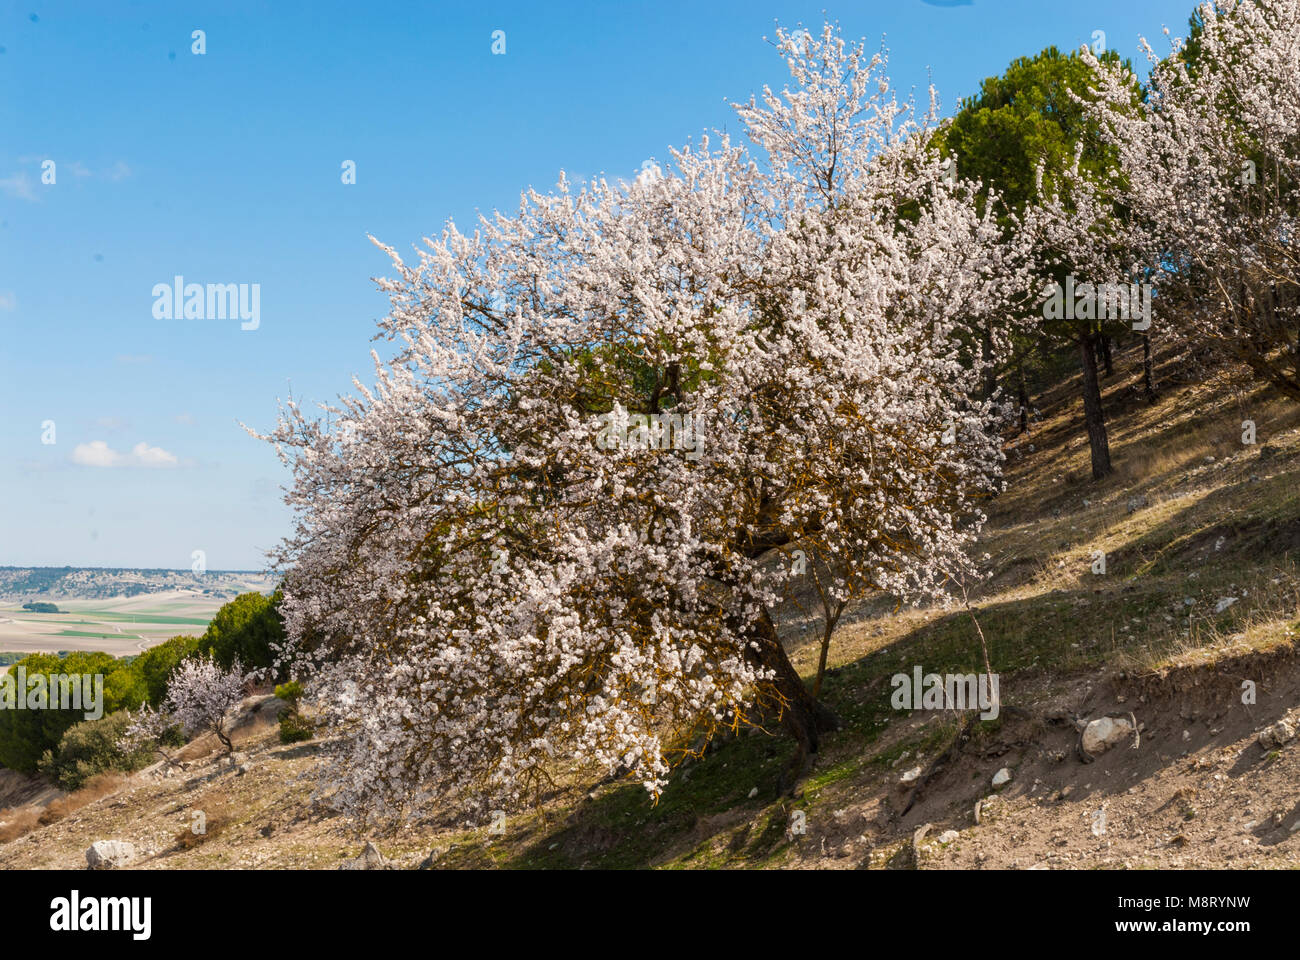 Almond tree with blossom Stock Photo